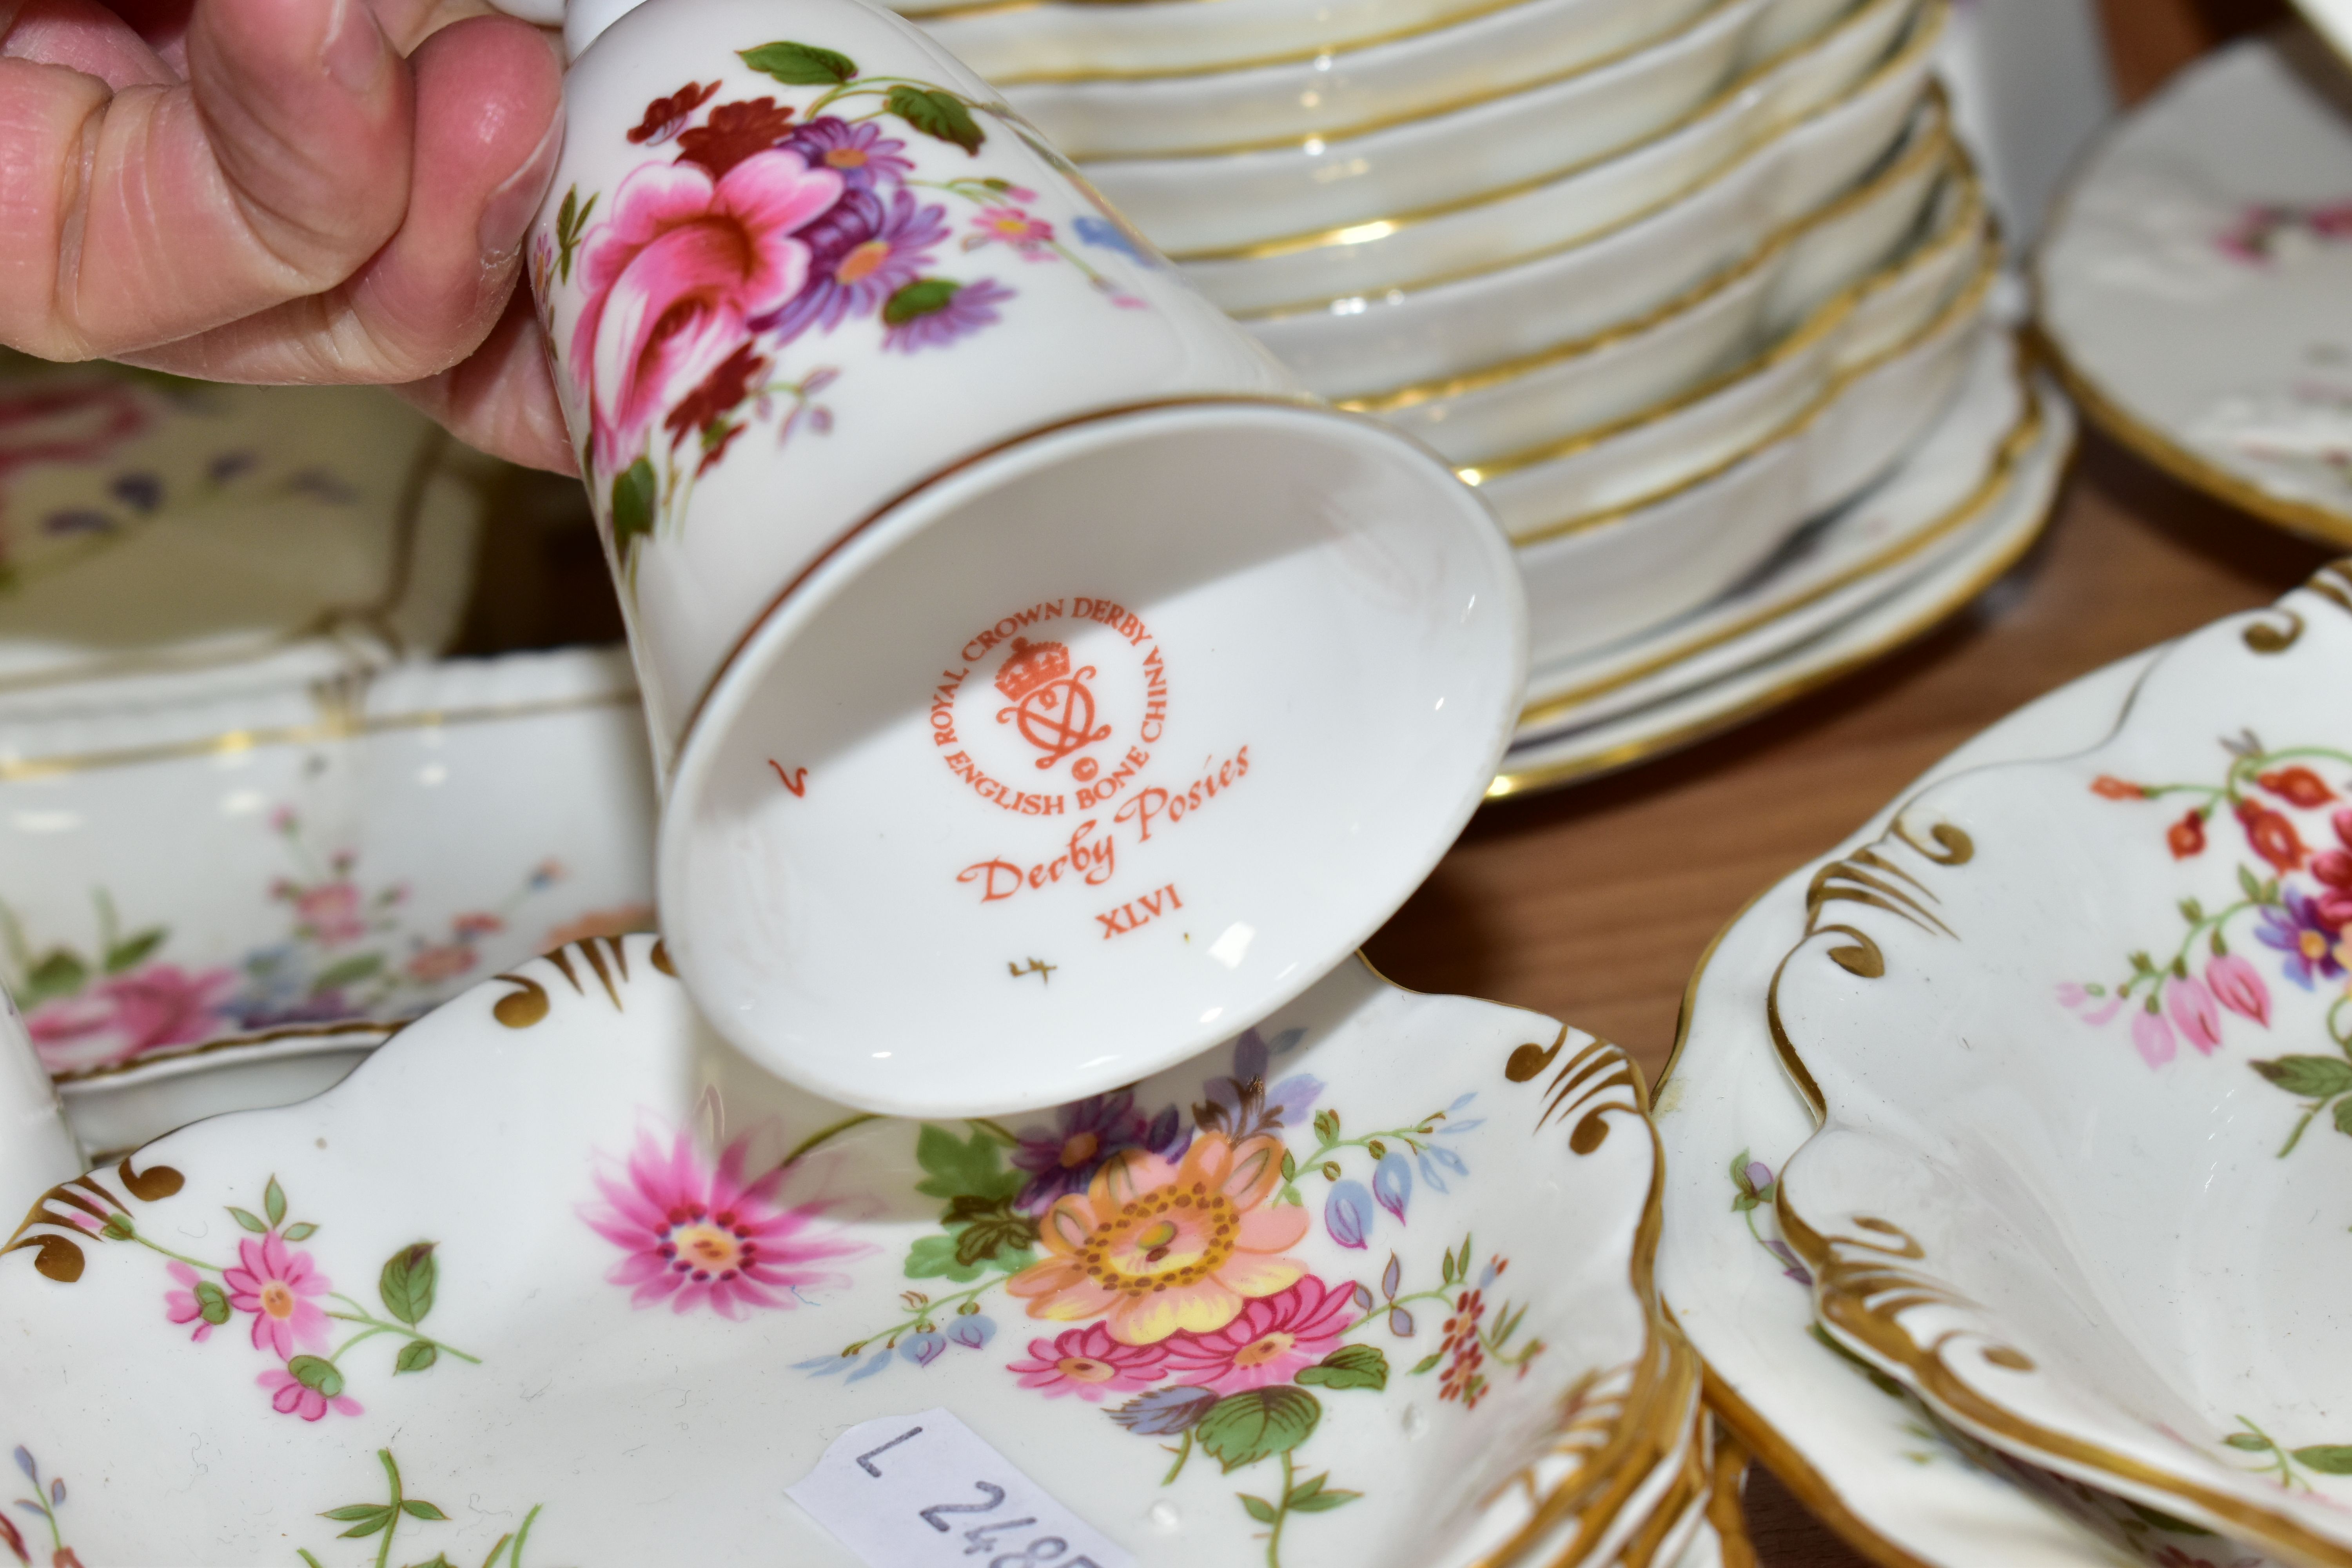 A QUANTITY OF ROYAL CROWN DERBY 'DERBY POSIES' PATTERN GIFT WARE, comprising jugs, preserve pots, - Image 18 of 18